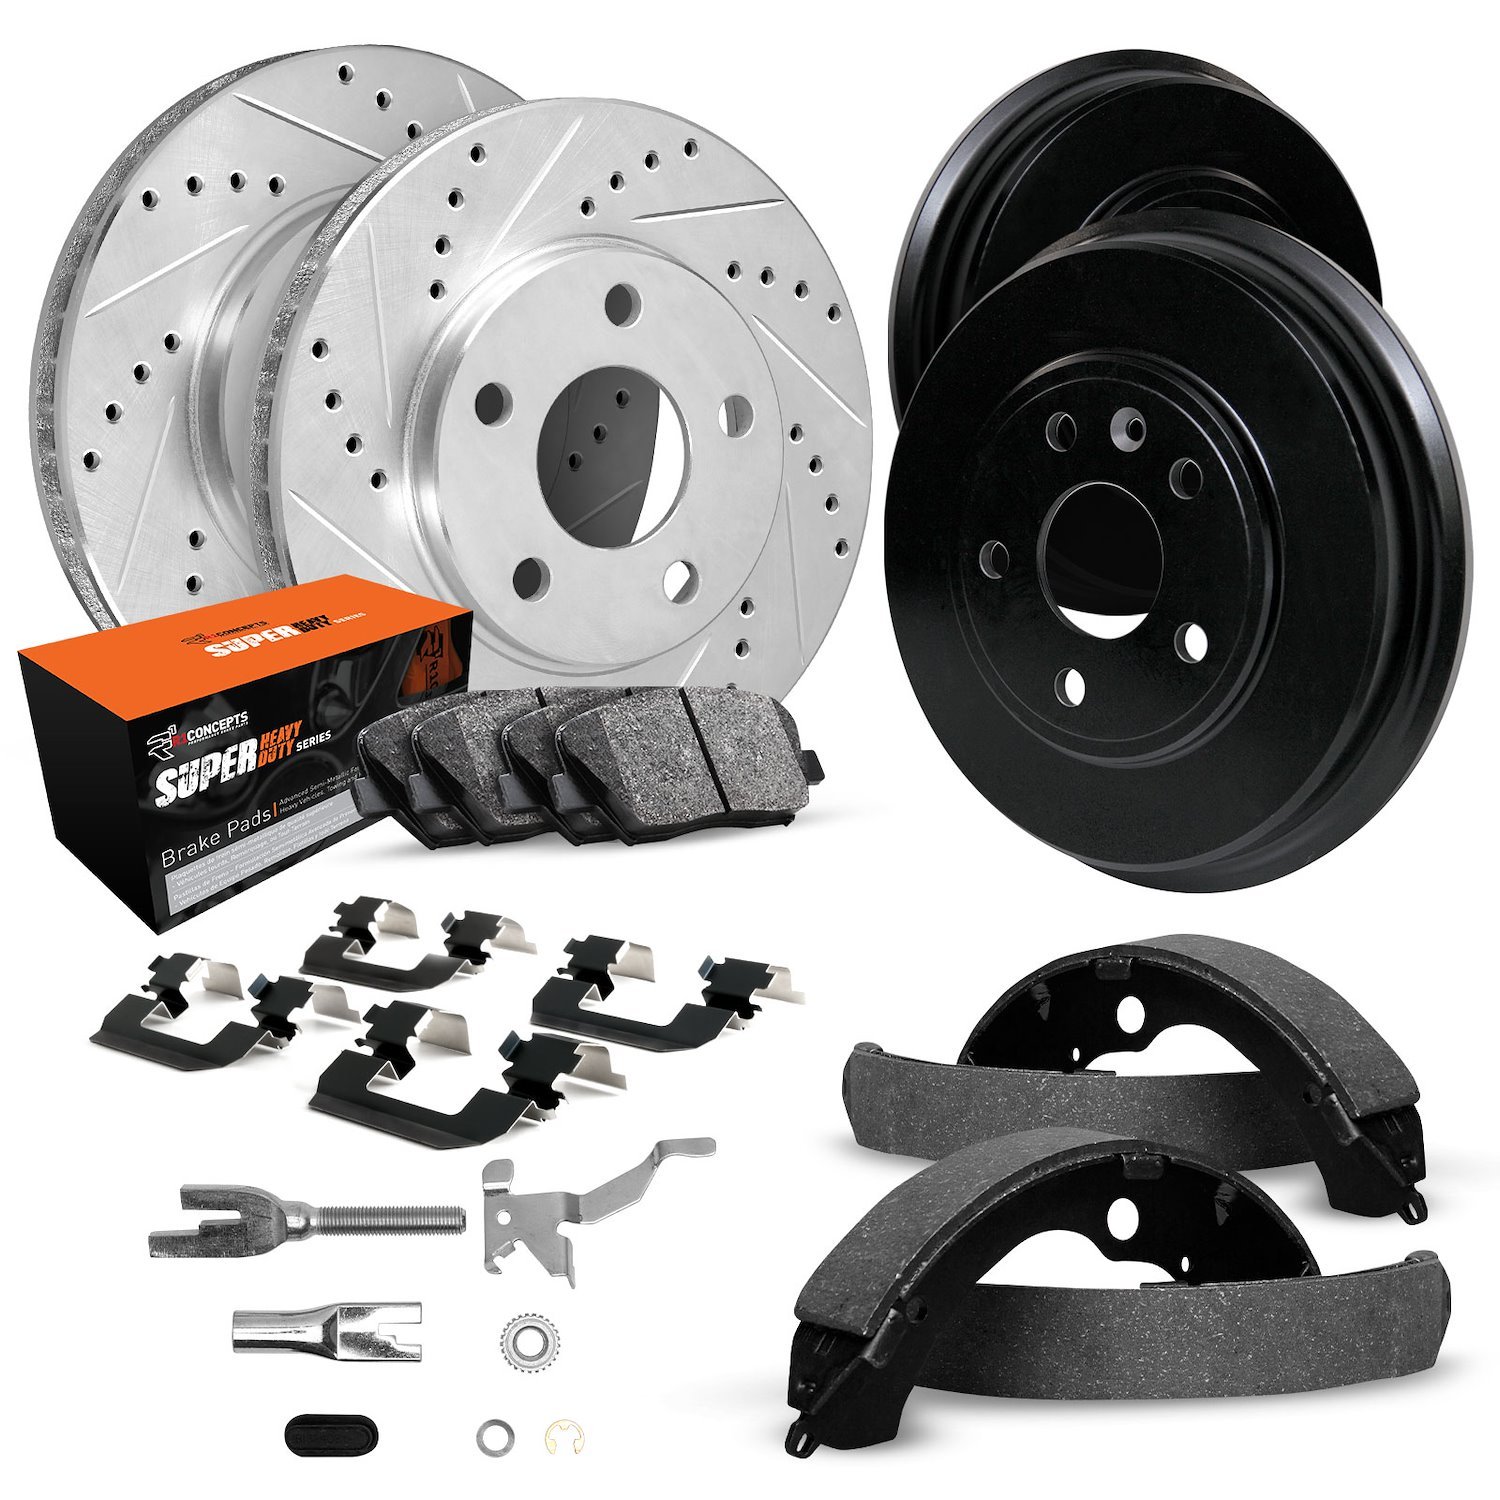 E-Line Drilled/Slotted Silver Rotor & Drum Set w/Super-Duty Pads, Shoes/Hardware/Adjusters, 1980-1985 Mopar